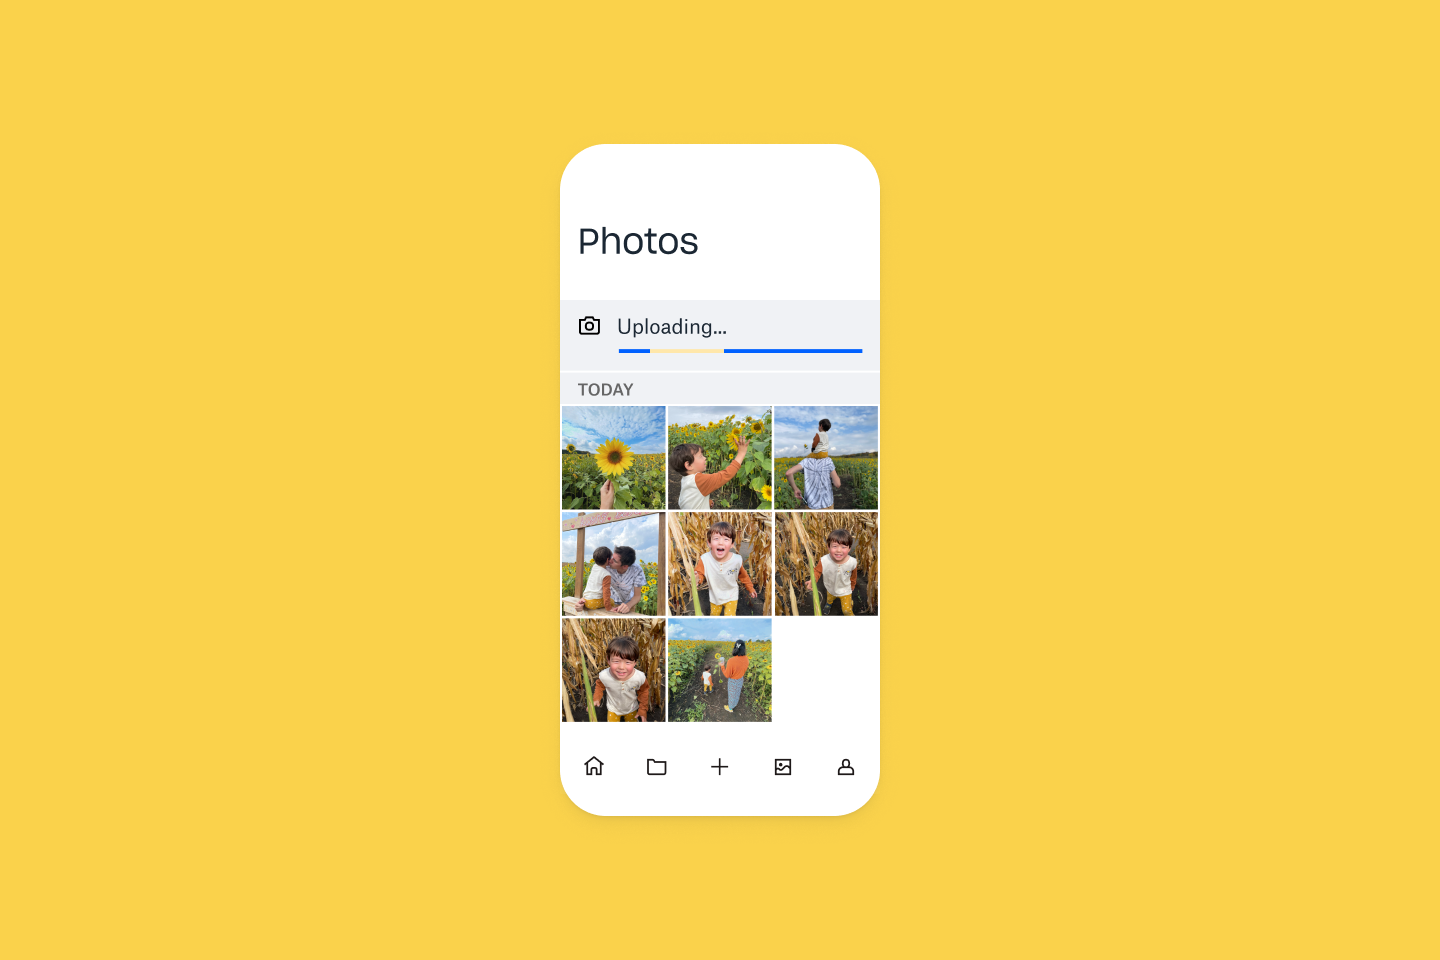 Upload photos to a Dropbox account using the Dropbox mobile app